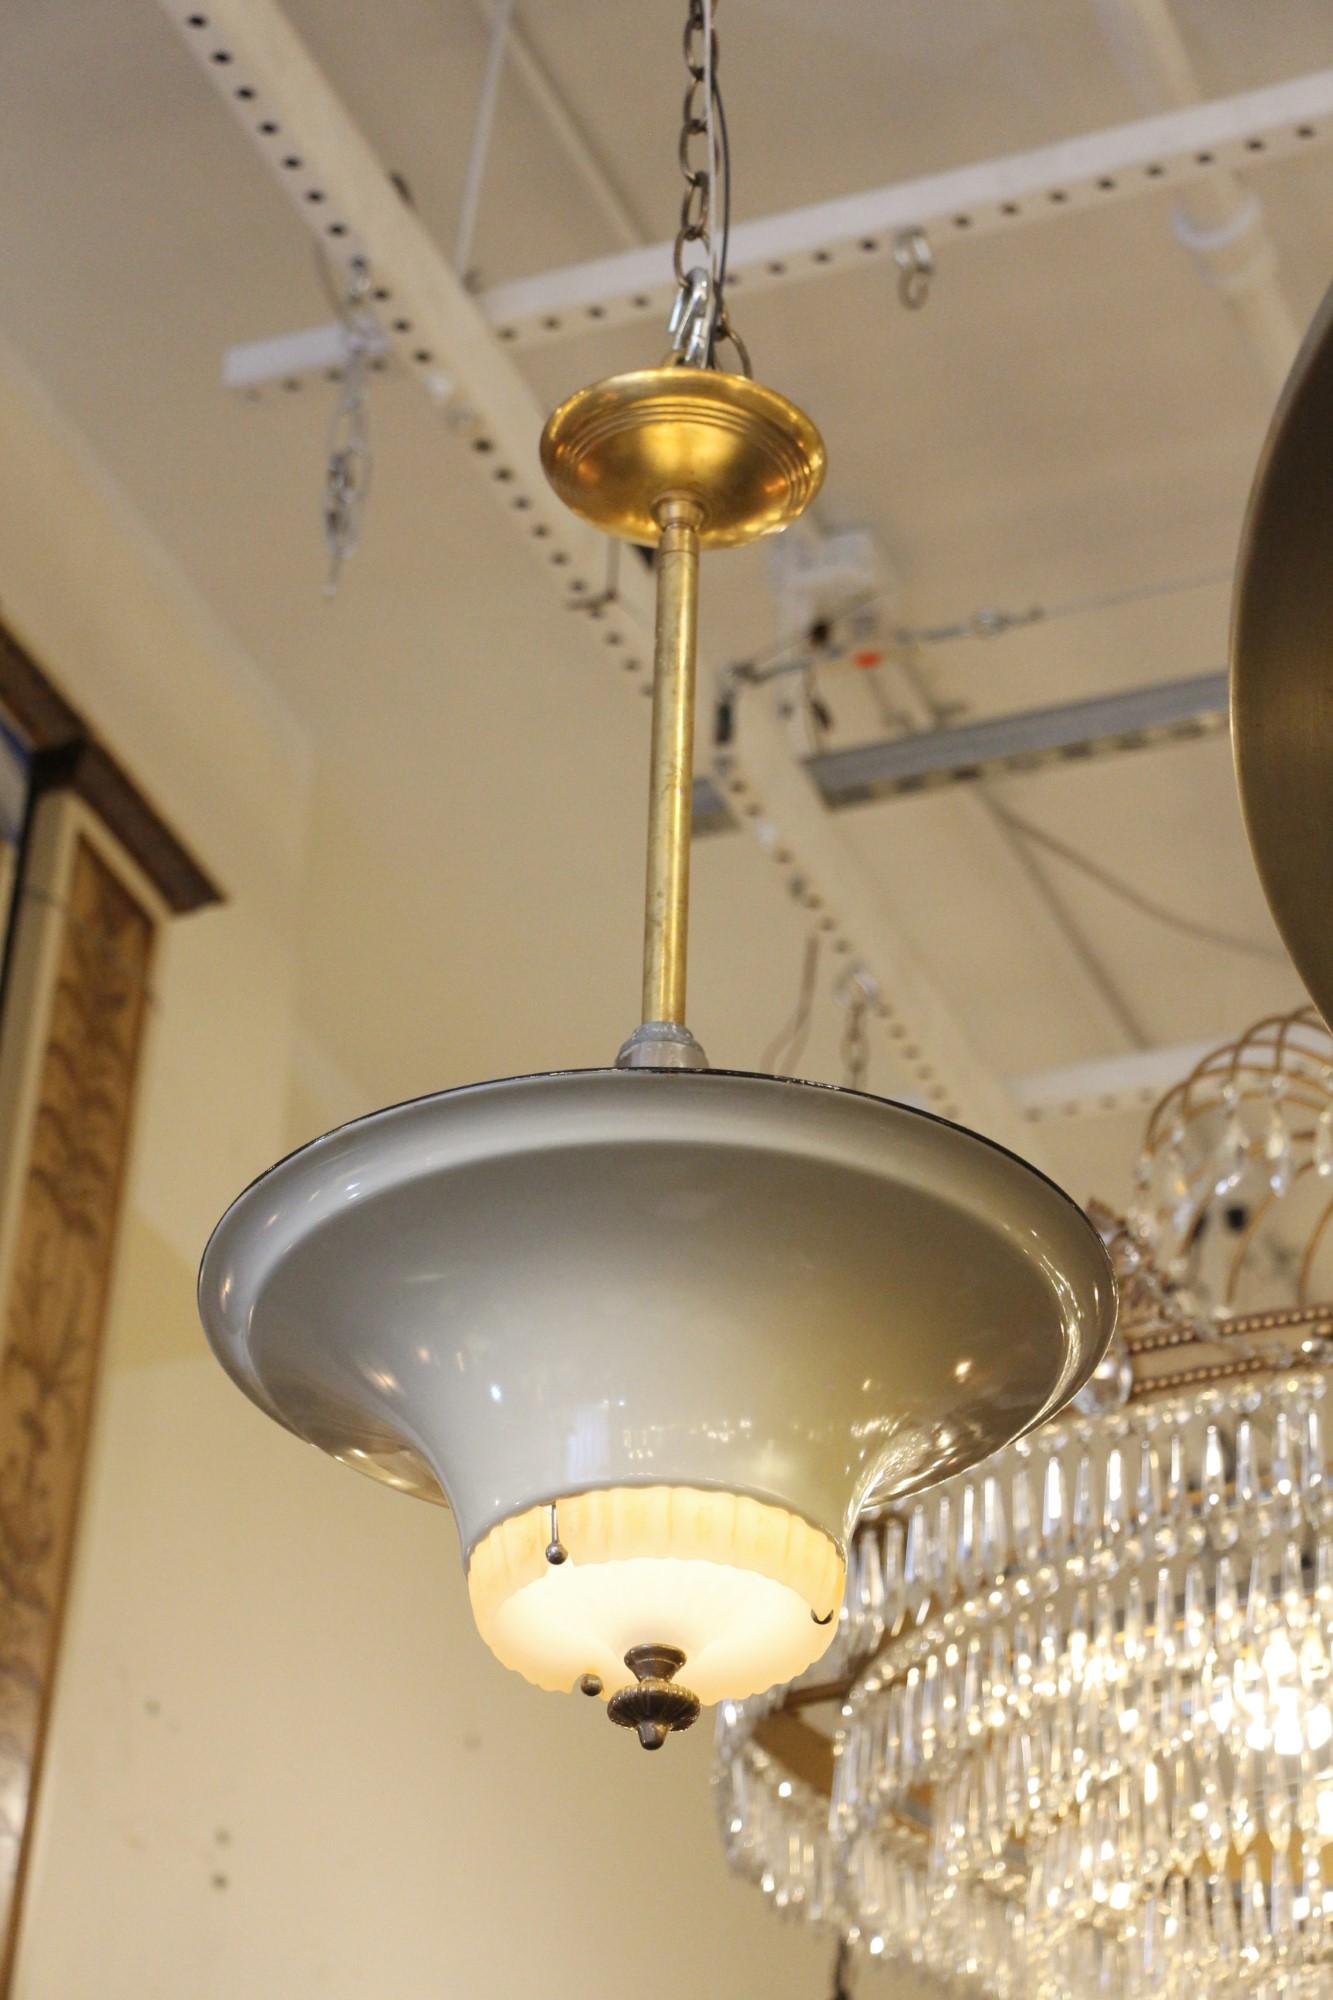 All original Jetson style 1950s enameled metal saucer light with an Art Deco glass center and a clear glass dome above the enamel, which is unseen when hanging. The enamel comes in either gray or cream color. There is also a variation on the finial,